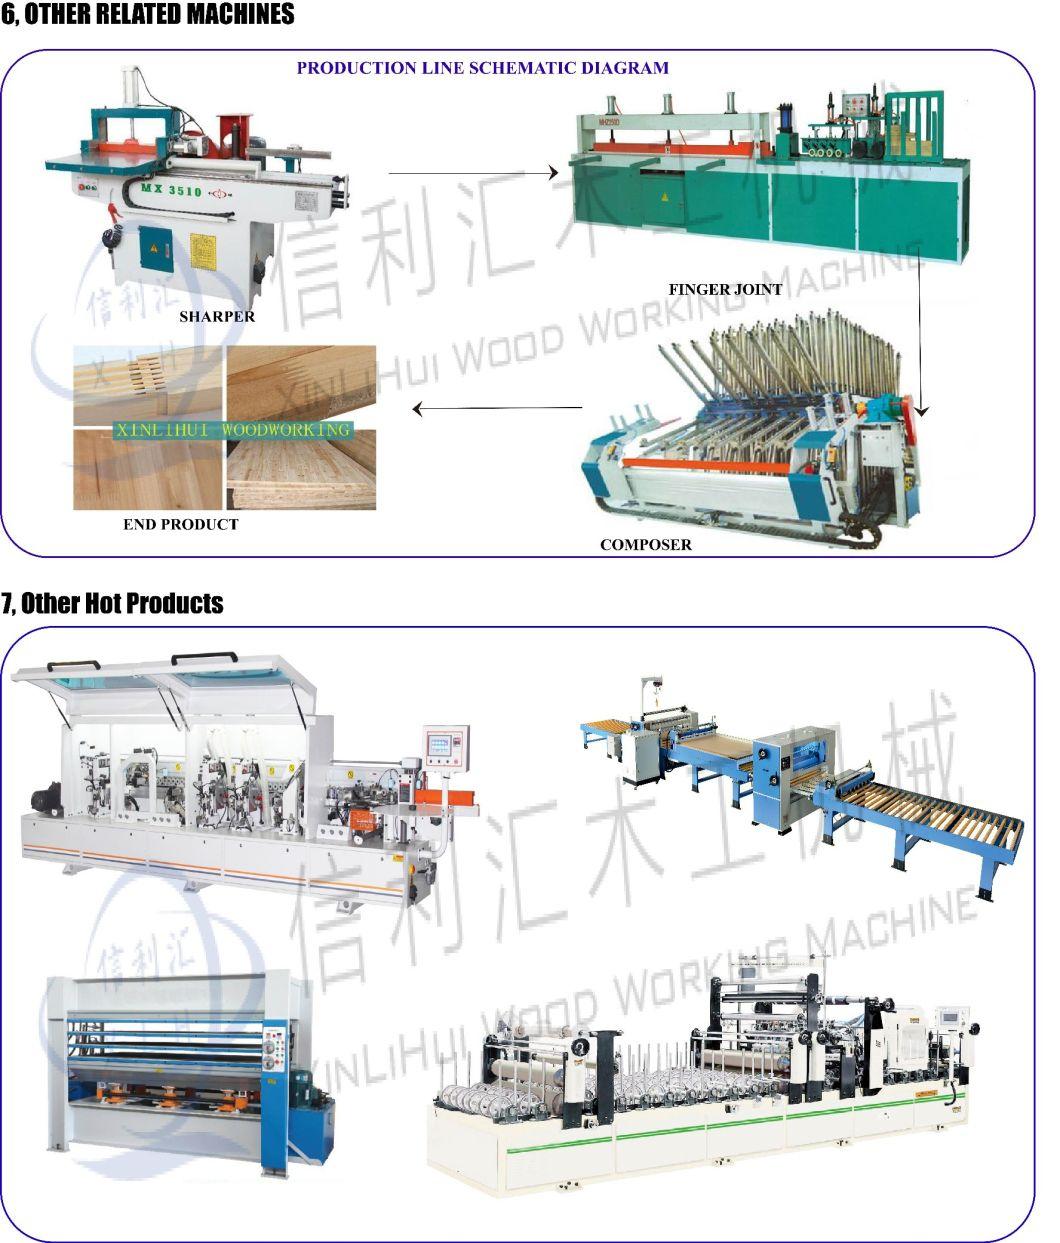 Woodworking Combined Finger Joint Shaper and Jointing Machine Auto Finger Joint Shaper Machine for Wood Laminating